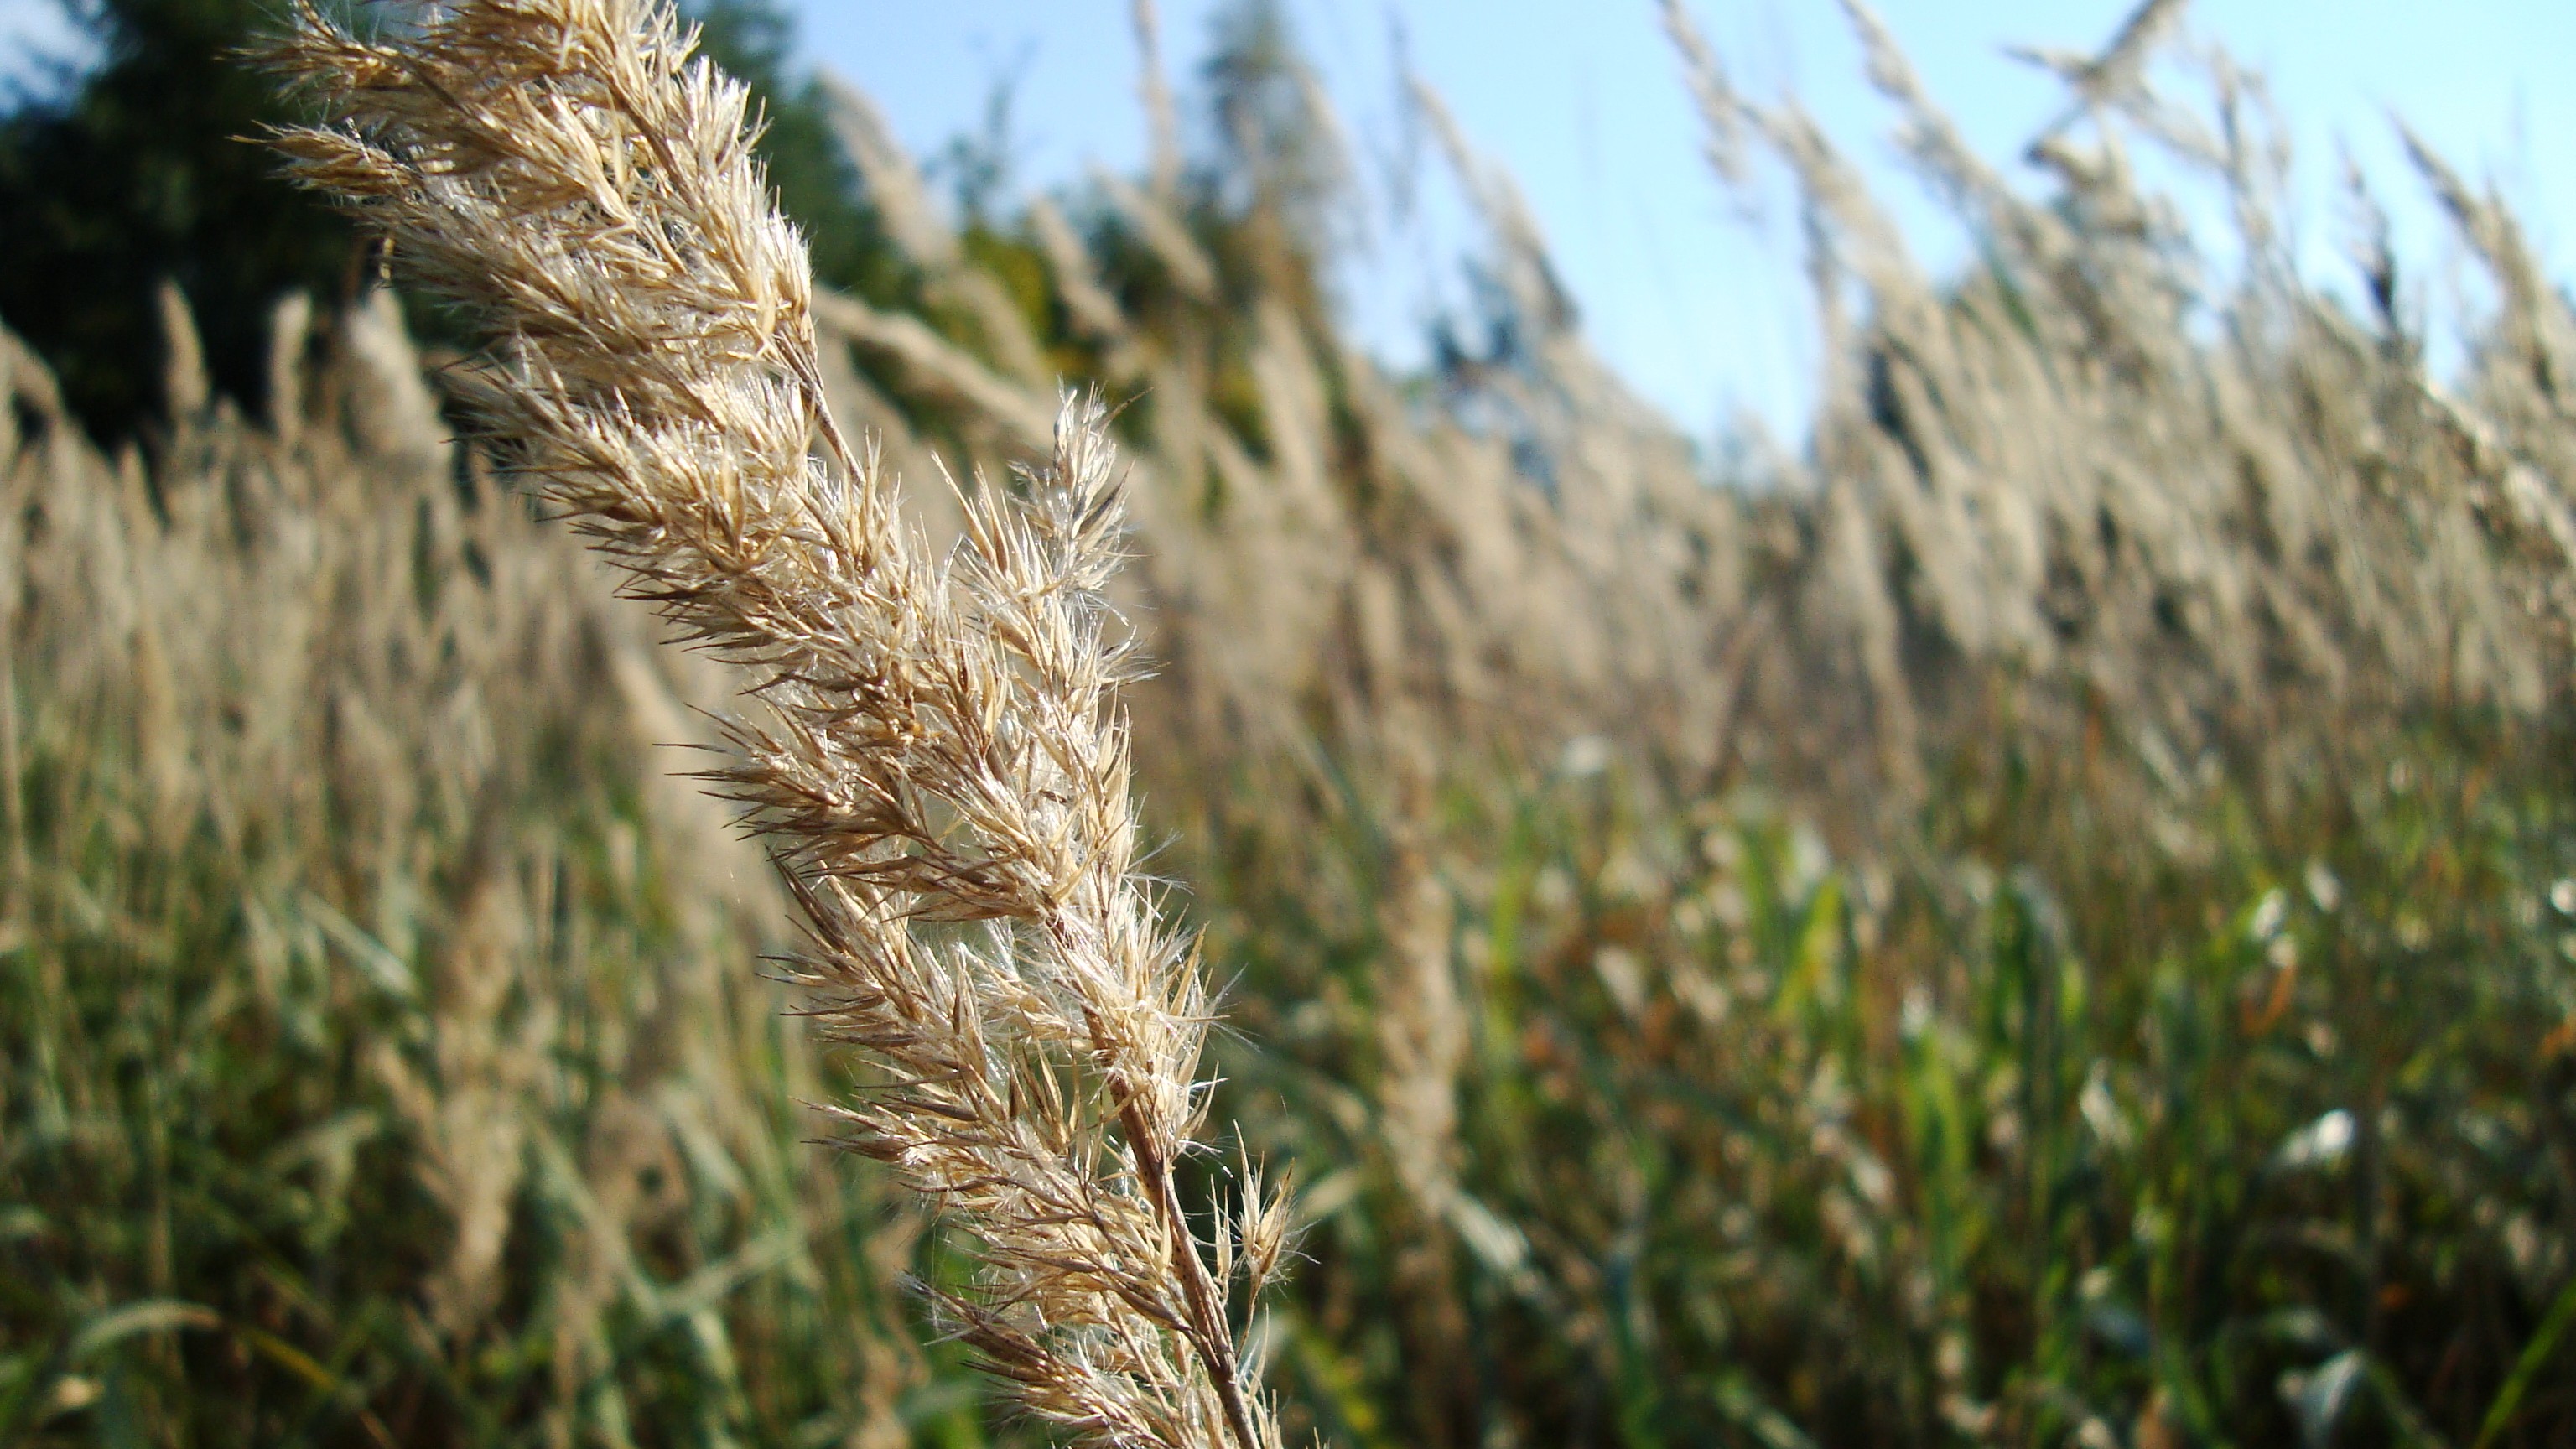 General 3072x1728 plants reeds macro green nature wheat outdoors